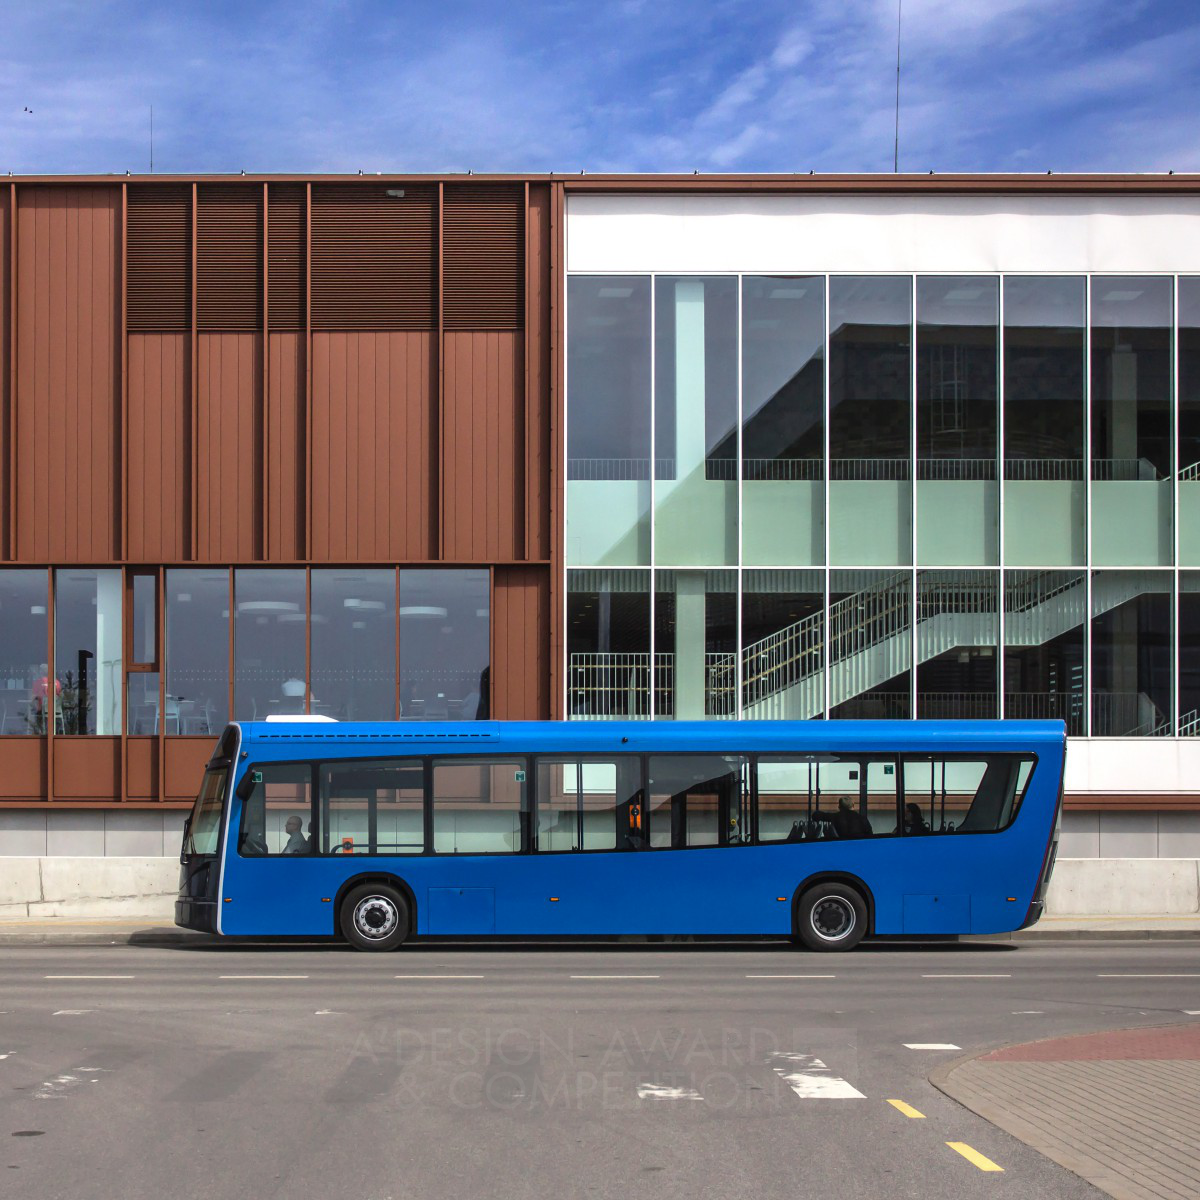 DANCER wins Golden at the prestigious A' Vehicle, Mobility and Transportation Design Award with Dancer Electric City Bus.